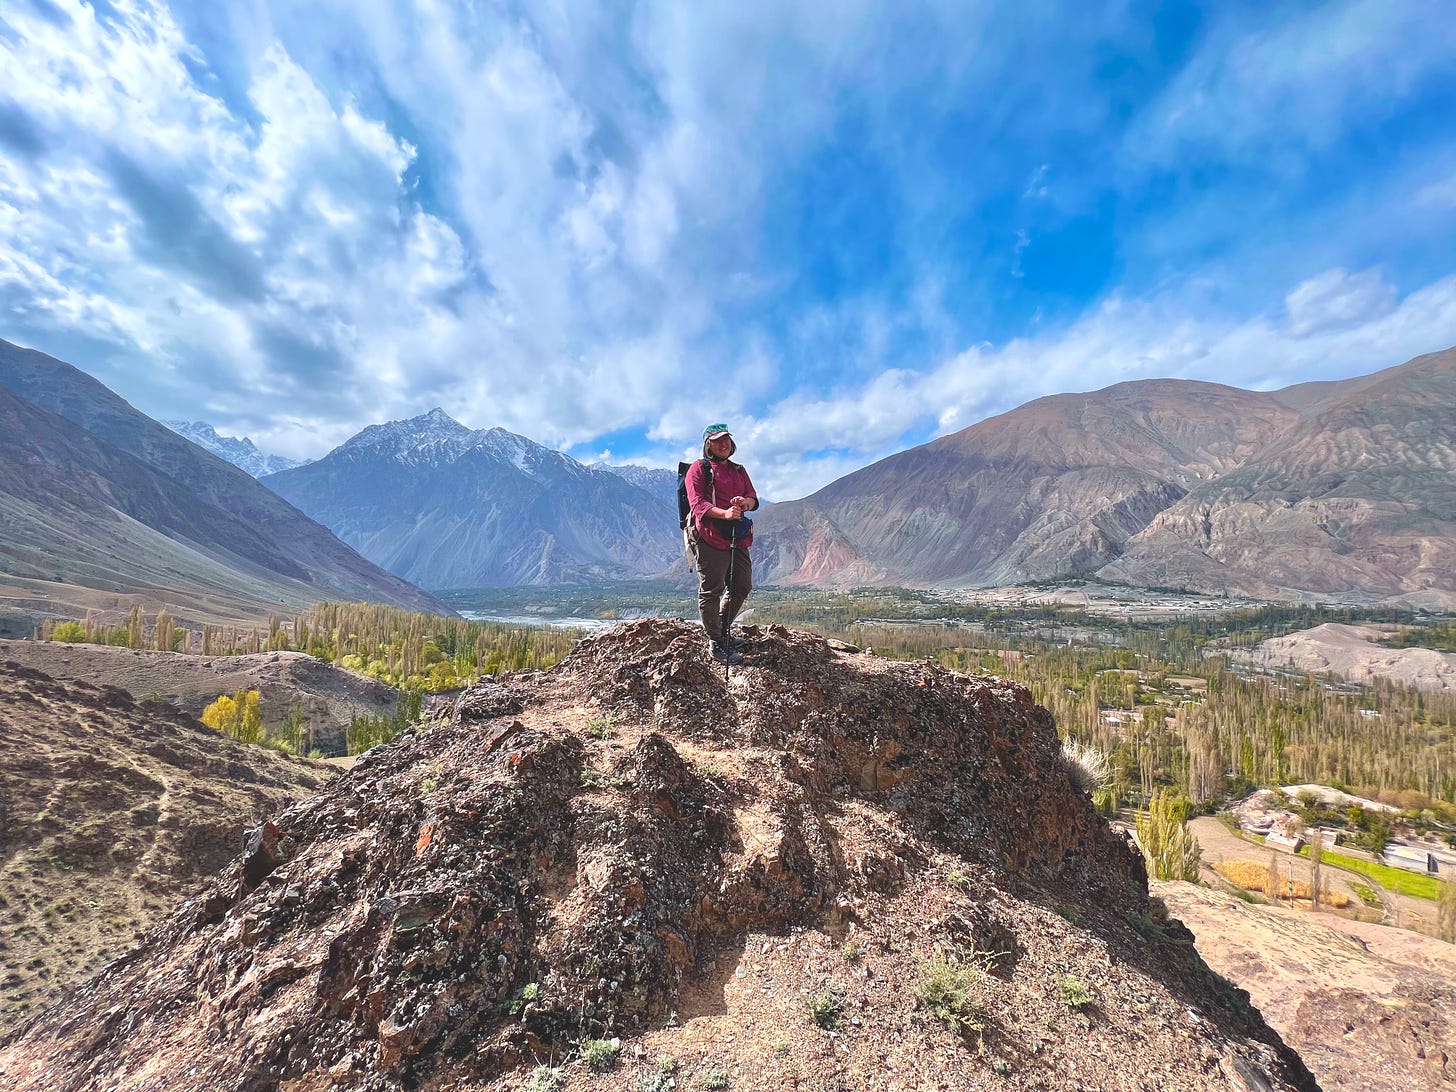 Asian girl standing on top of a rock on top of a hill in Yasin Valley, Pakistan. Behind her is the valley with green fields, blue river, green trees, and a large brown mountain range